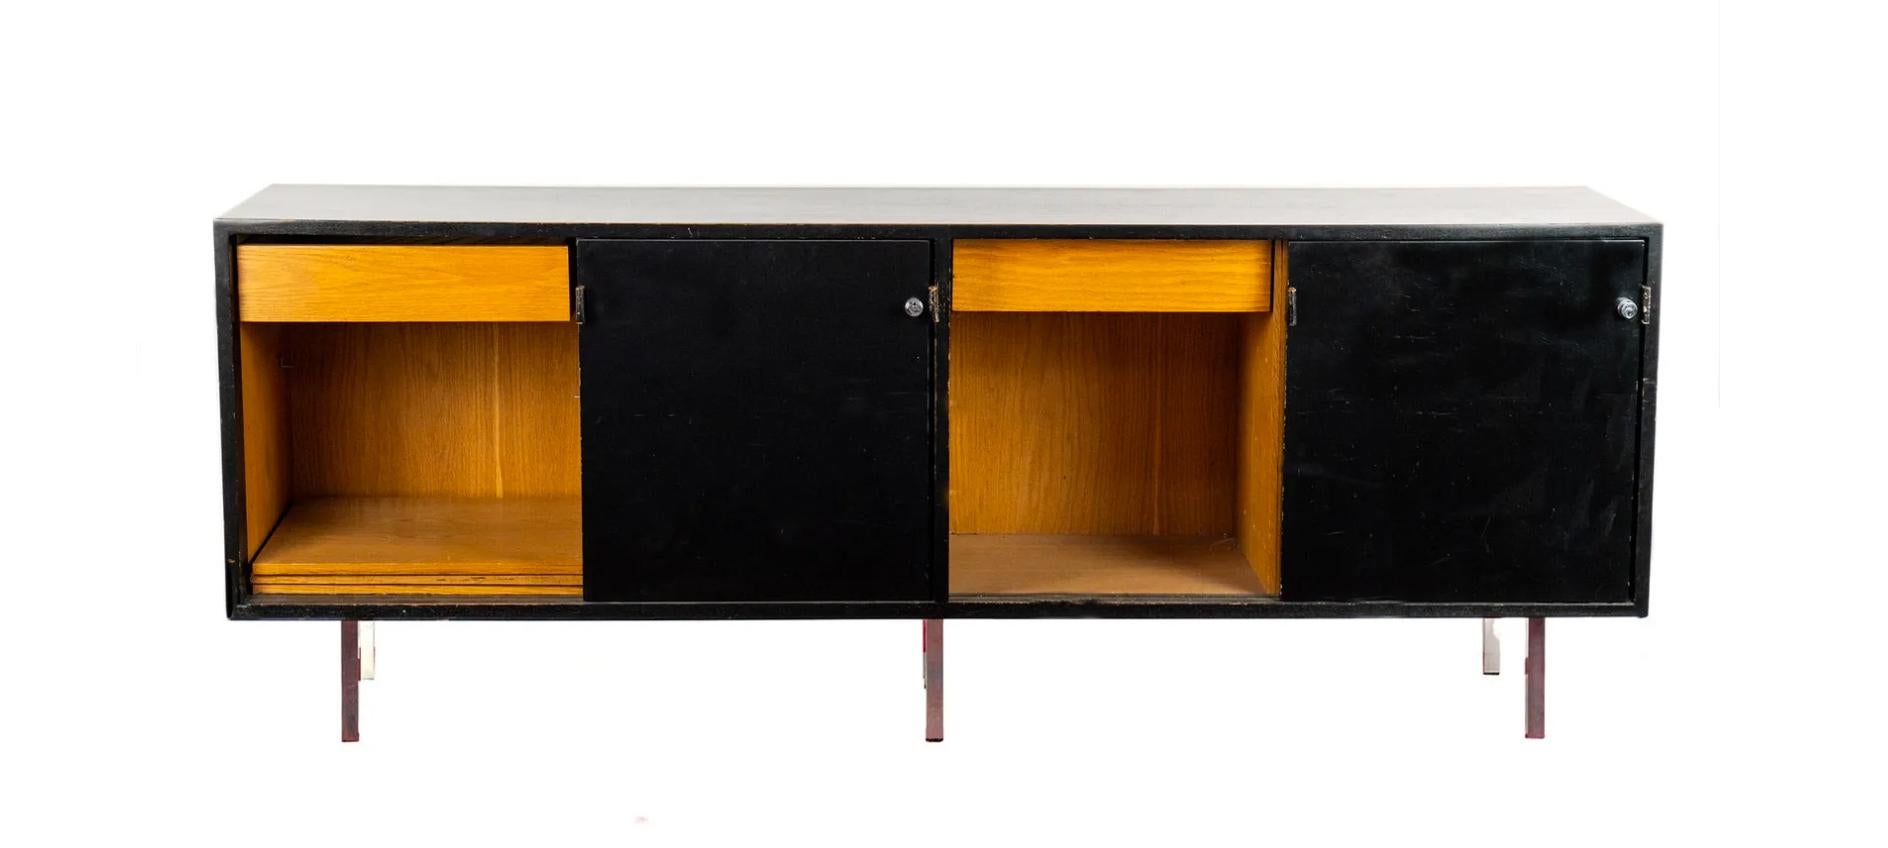 Beautiful practical credenza for living or office space. Sliding doors with leather pulls reveal two file cabinets, drawers and adjustable shelves. Perfect for your storage needs. Cabinet is made of Oak with a black lacquer finish that sits on 6